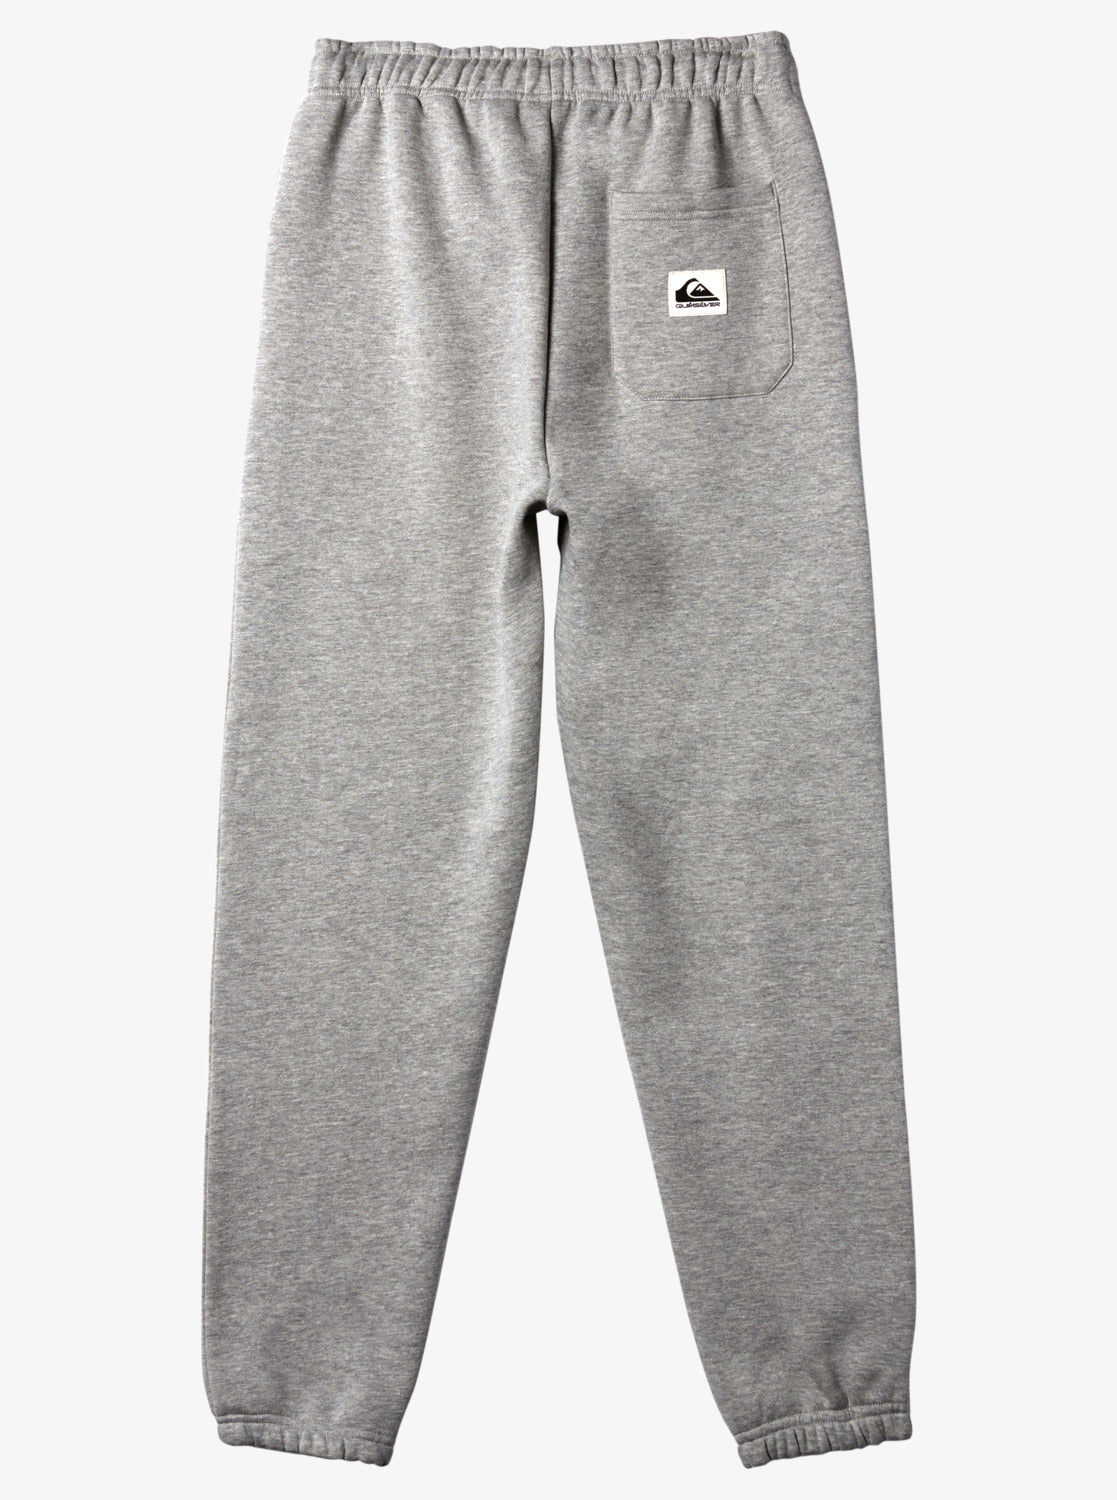 Quiksilver Rainmaker Boys Joggers in Athletic Heather